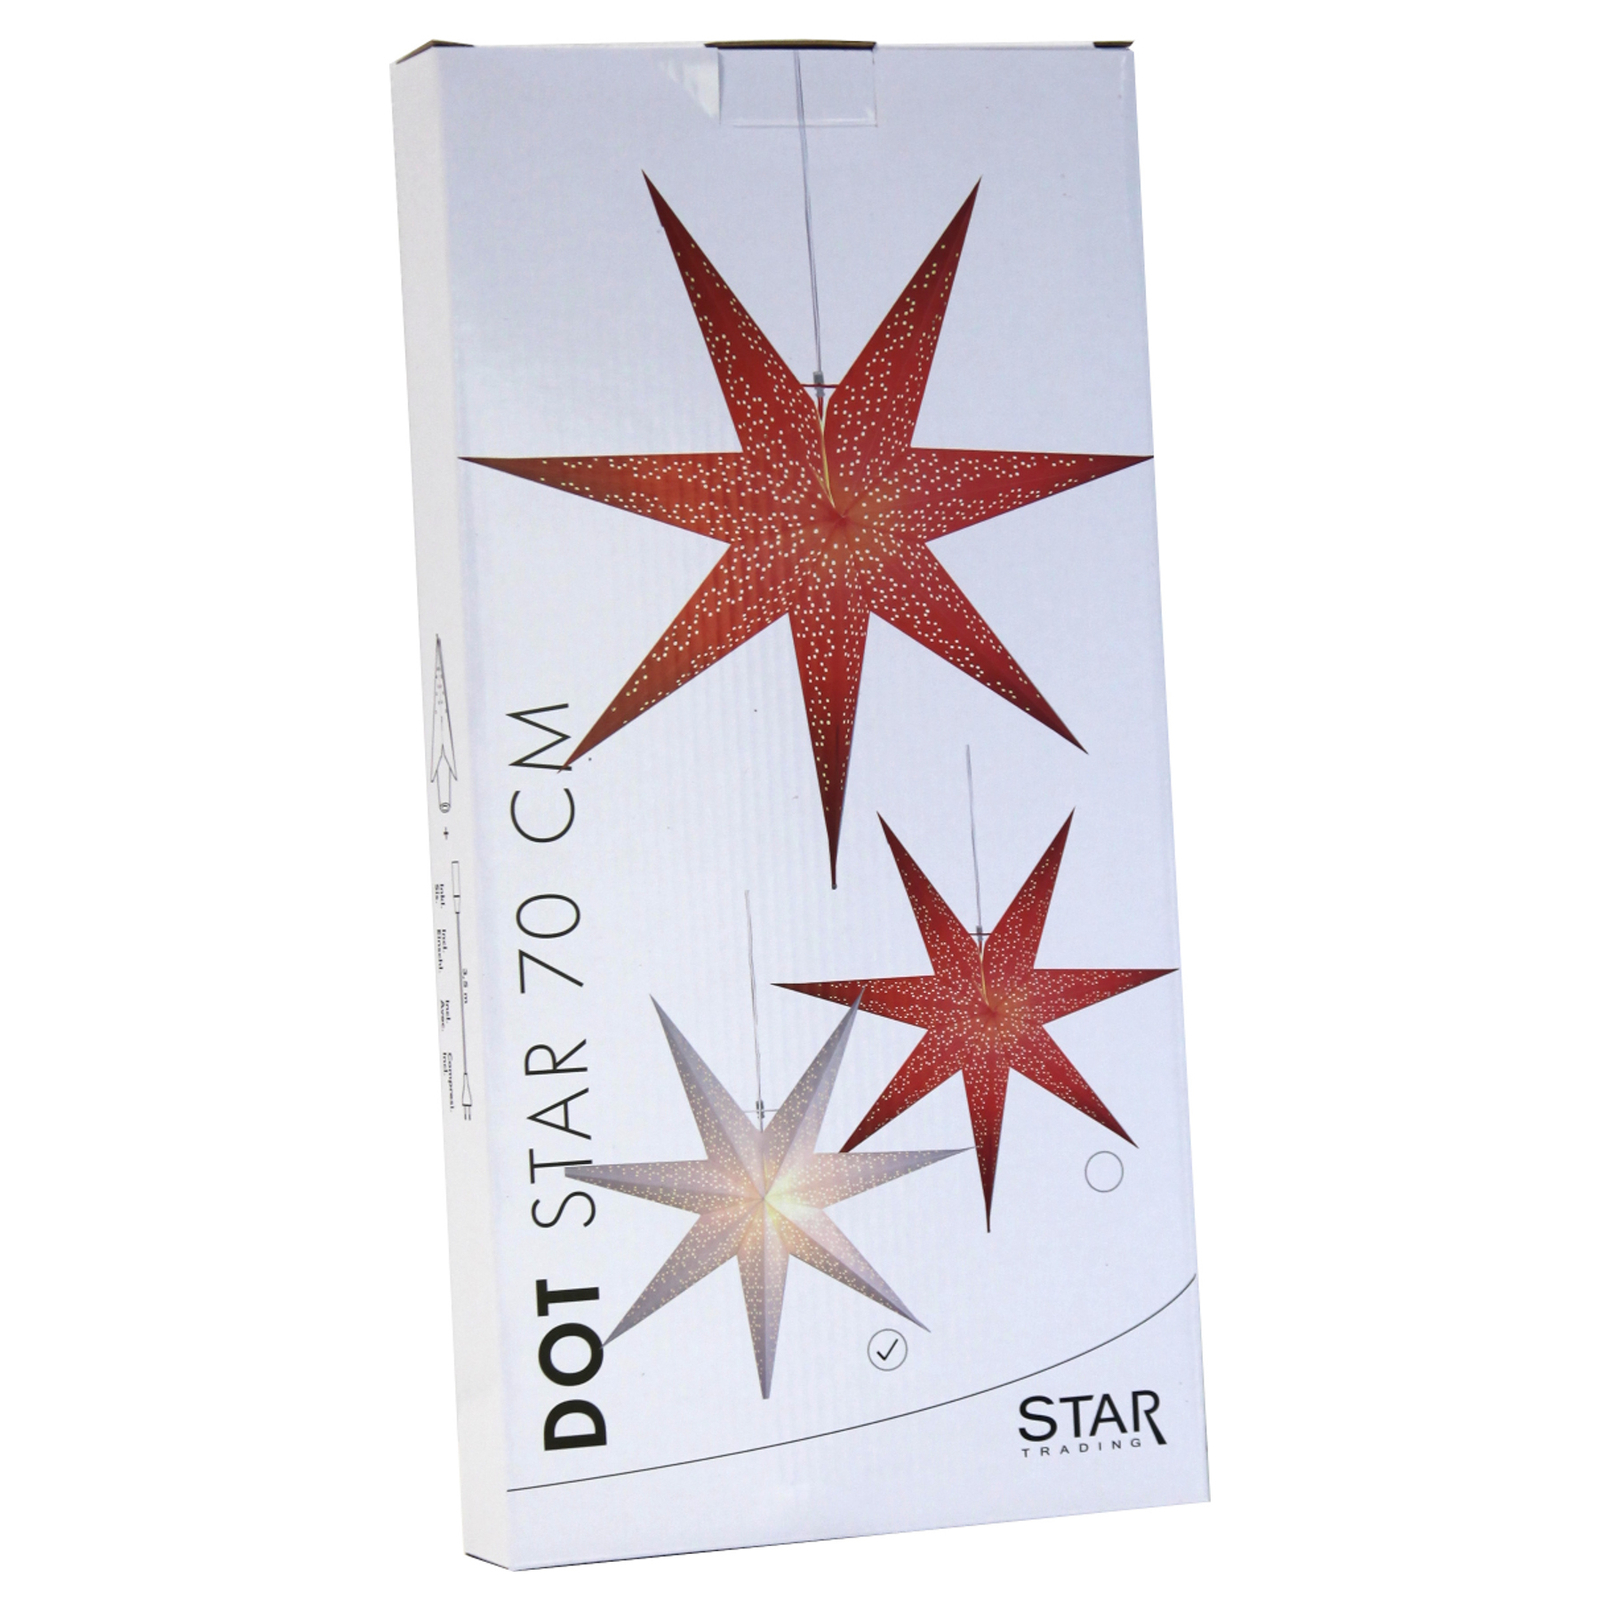 Dot paper star with hole pattern, white Ø 70 cm